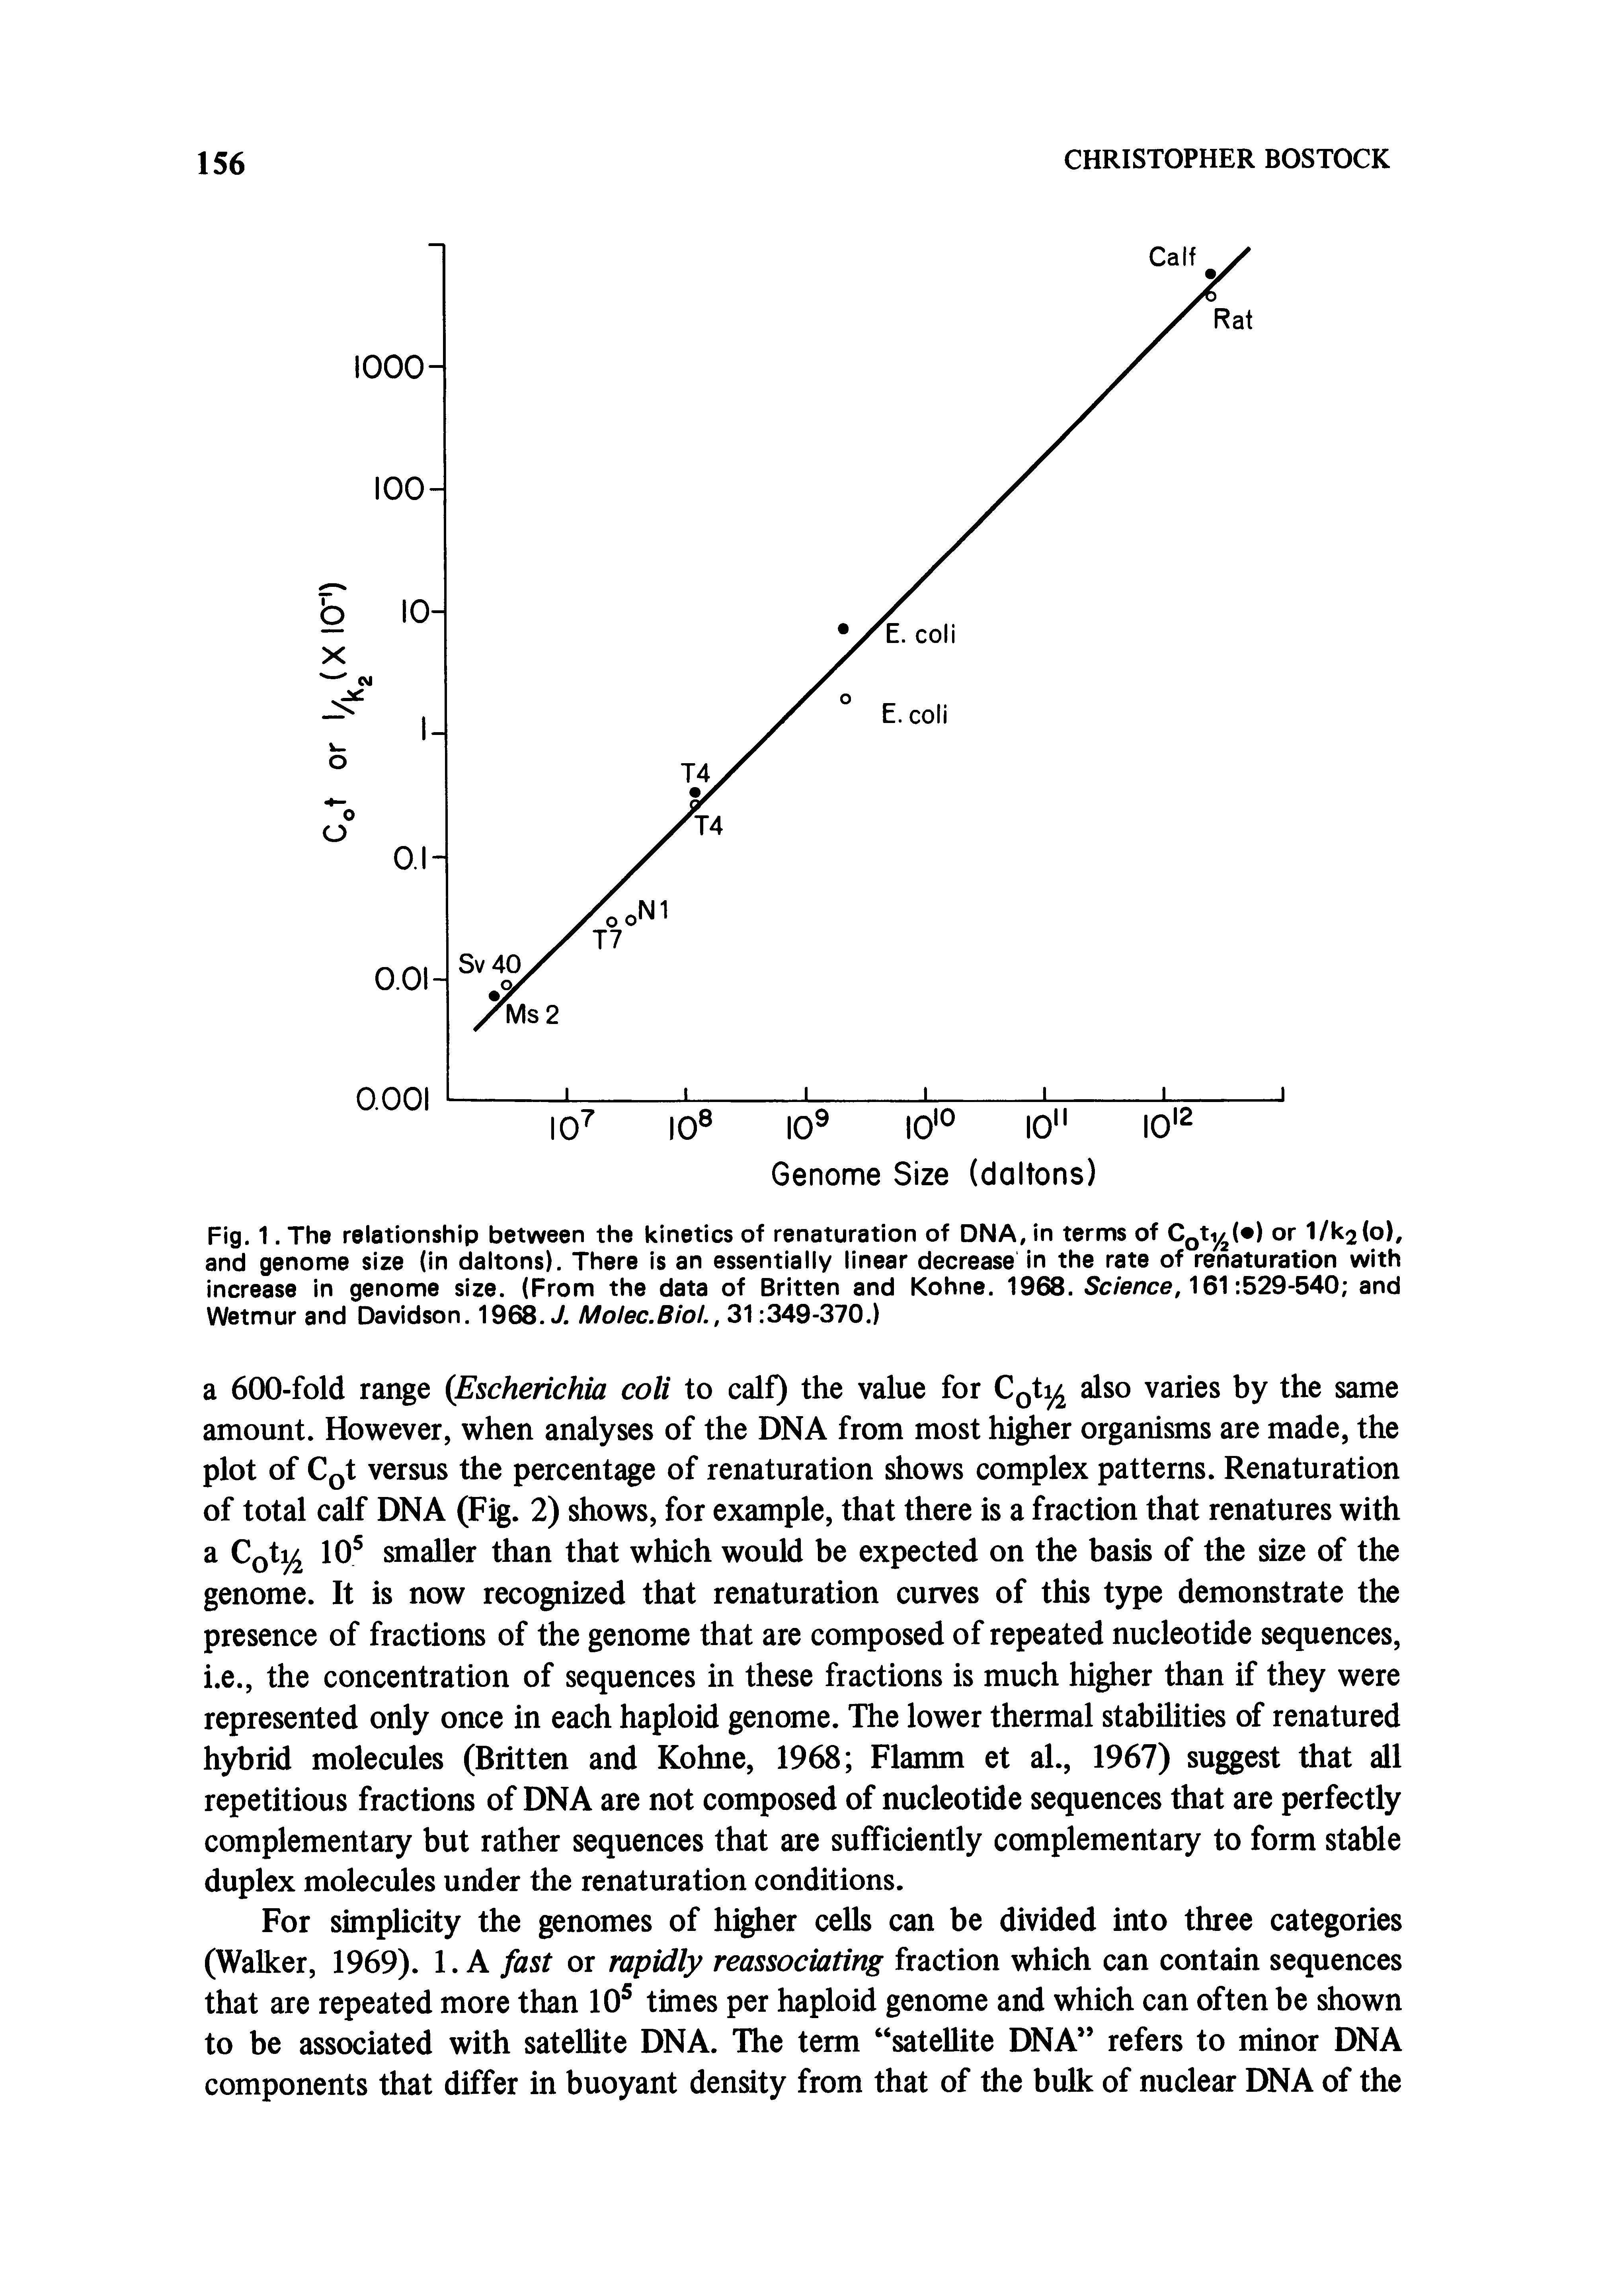 Fig. 1. The relationship between the kinetics of renaturation of DNA, in terms of CQti ( ) or 1/k2(o), and genome size (in daitons). There is an essentially linear decrease in the rate of renaturation with increase in genome size. (From the data of Britten and Kohne. 1968. Sc/eA7ce, 161 529-540 and Wetmur and Davidson. 1968. Molec.Biol.,3 349-370.)...